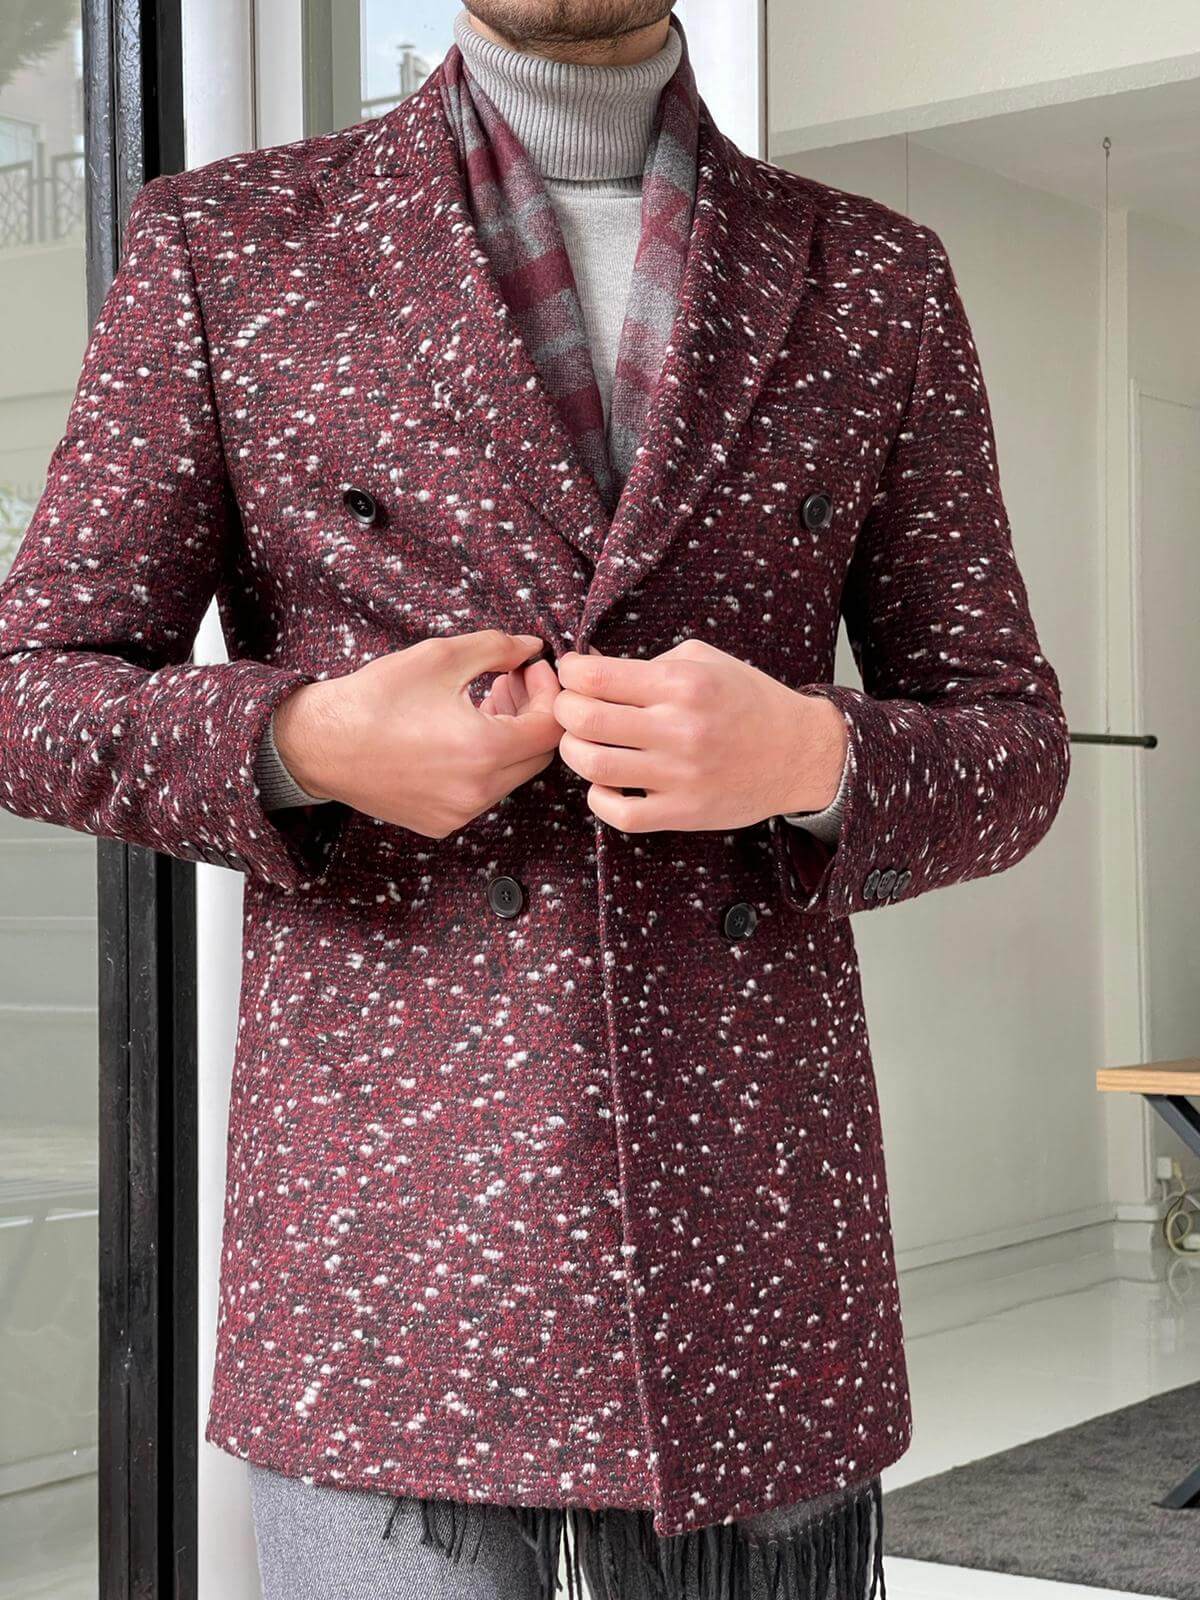 HolloMen's claret red wool coat featuring a double-breasted design